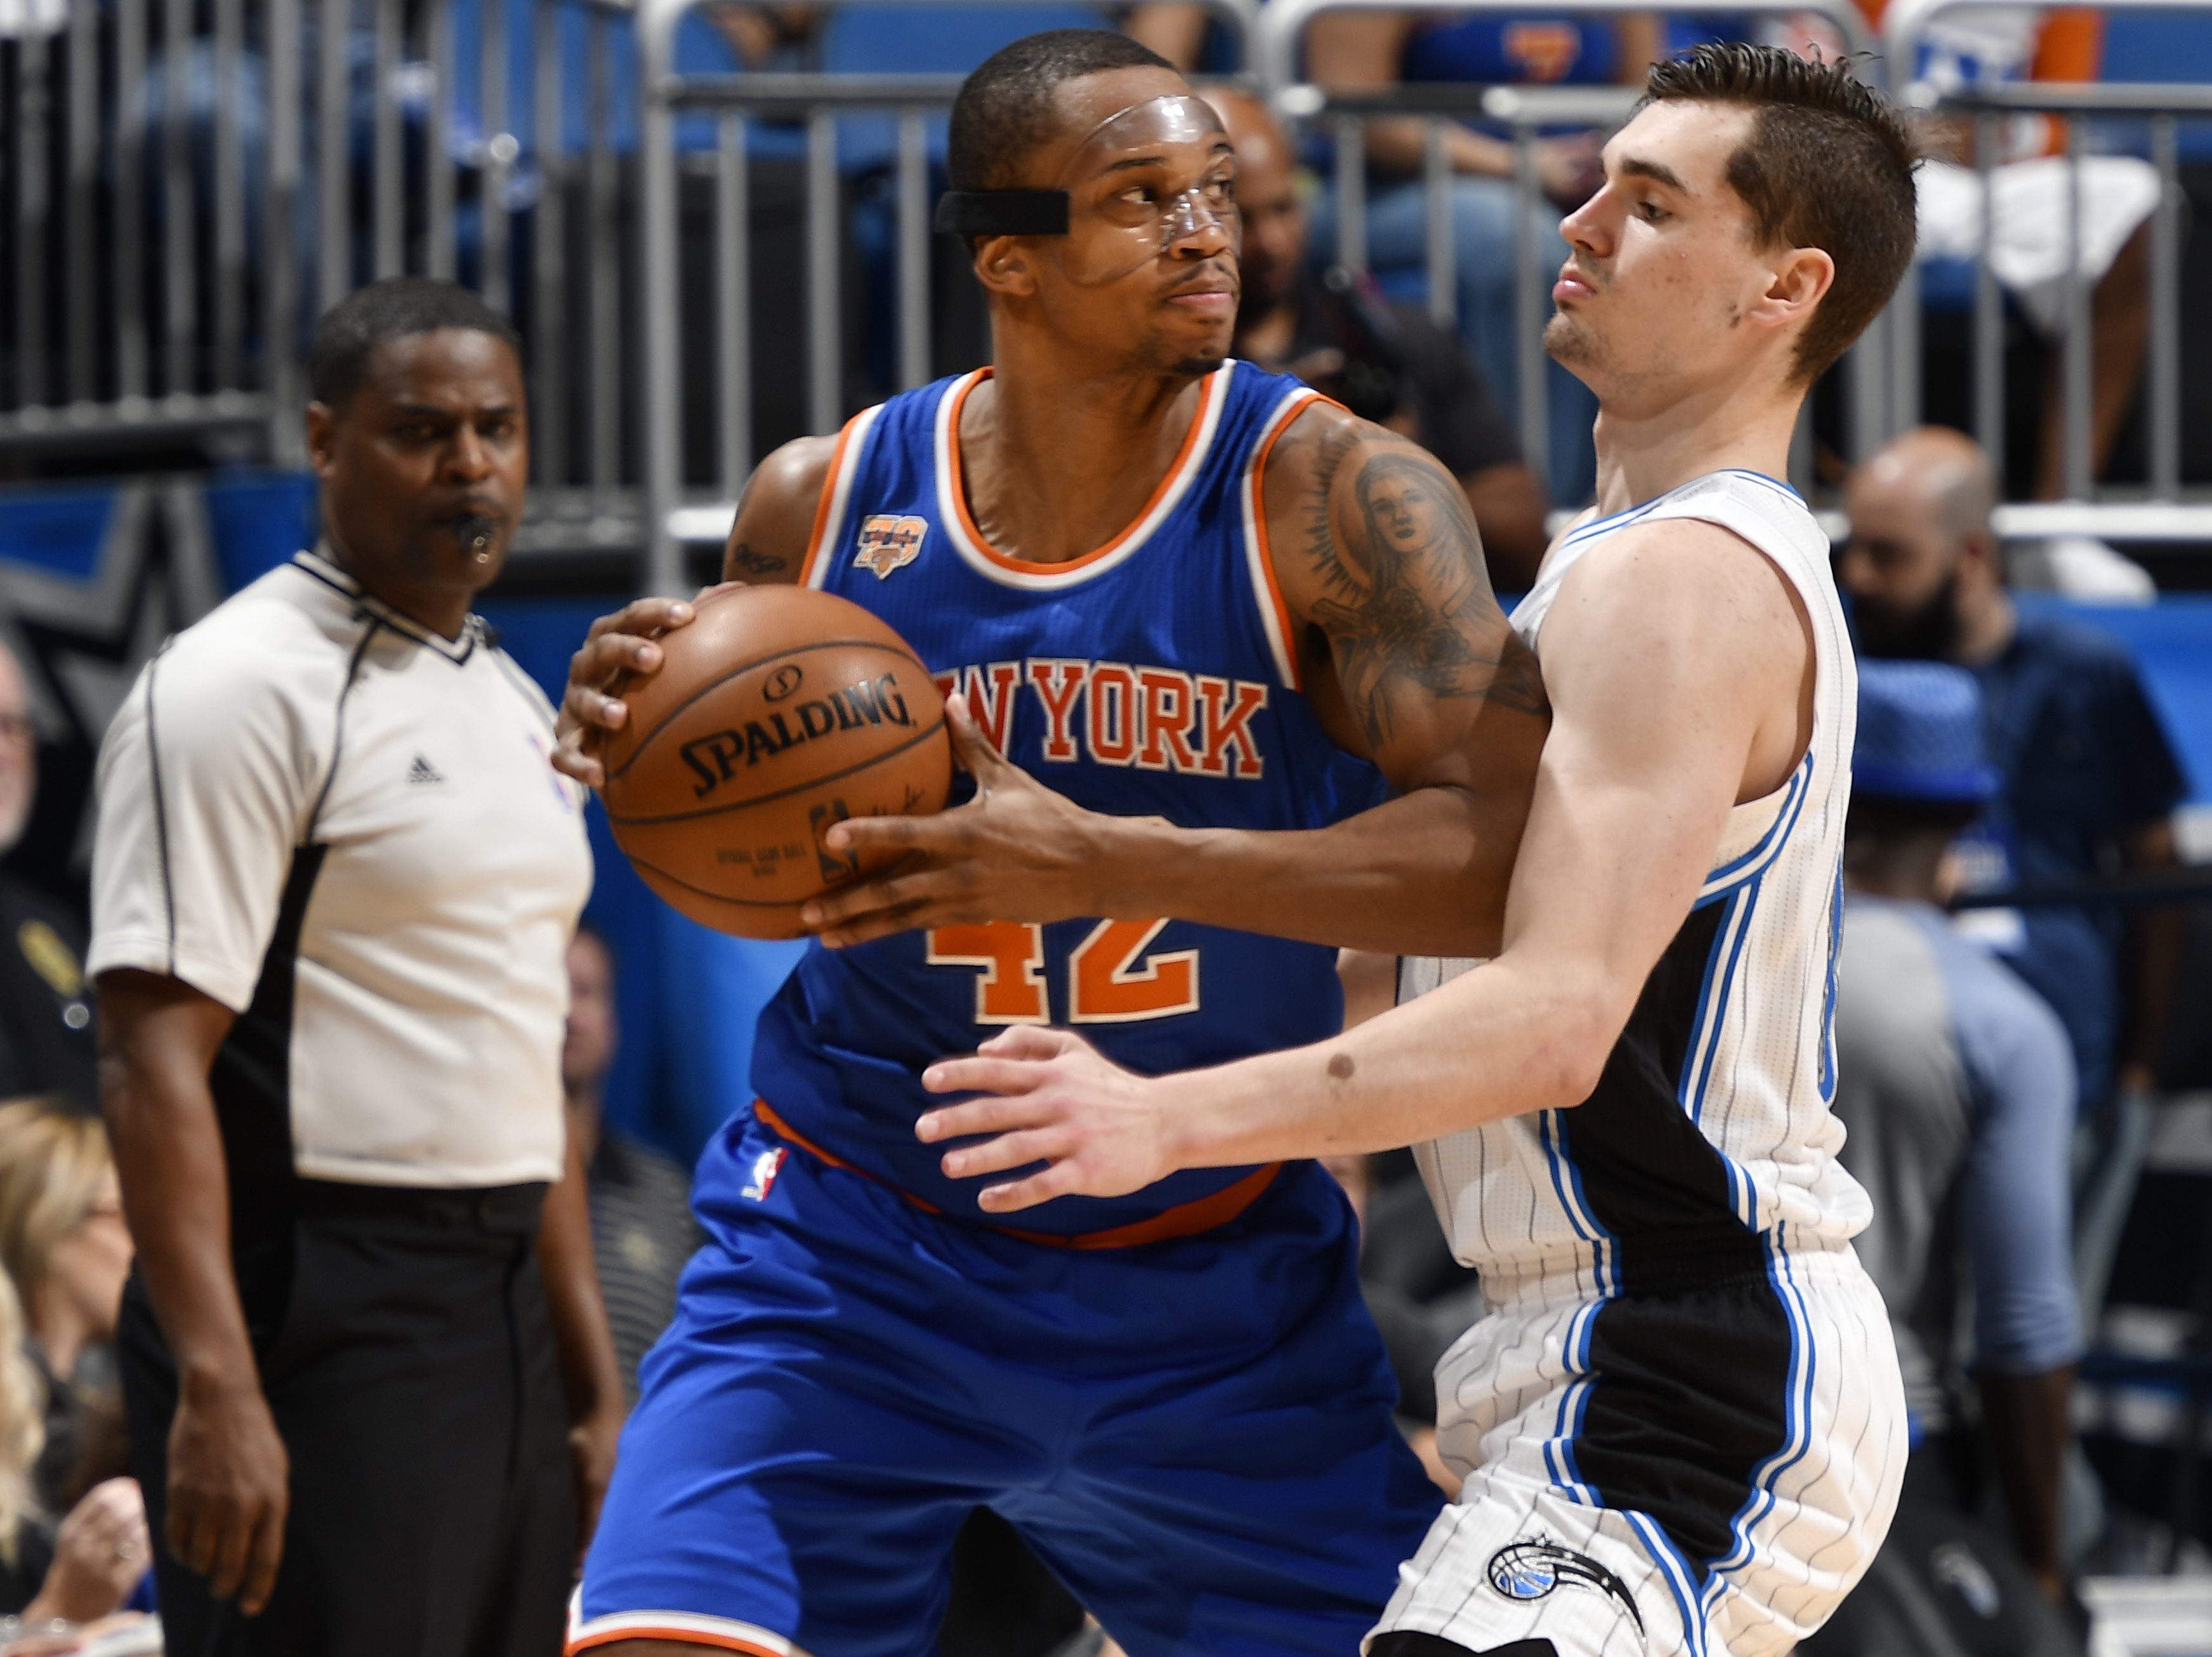 ORLANDO, FL - MARCH 1: Lance Thomas #42 of the New York Knicks handles the ball during a game against the Orlando Magic on March 1, 2017 at Amway Center in Orlando, Florida. NOTE TO USER: User expressly acknowledges and agrees that, by downloading and/or using this photograph, user is consenting to the terms and conditions of the Getty Images License Agreement. Mandatory Copyright Notice: Copyright 2017 NBAE (Photo by Fernando Medina/NBAE via Getty Images)